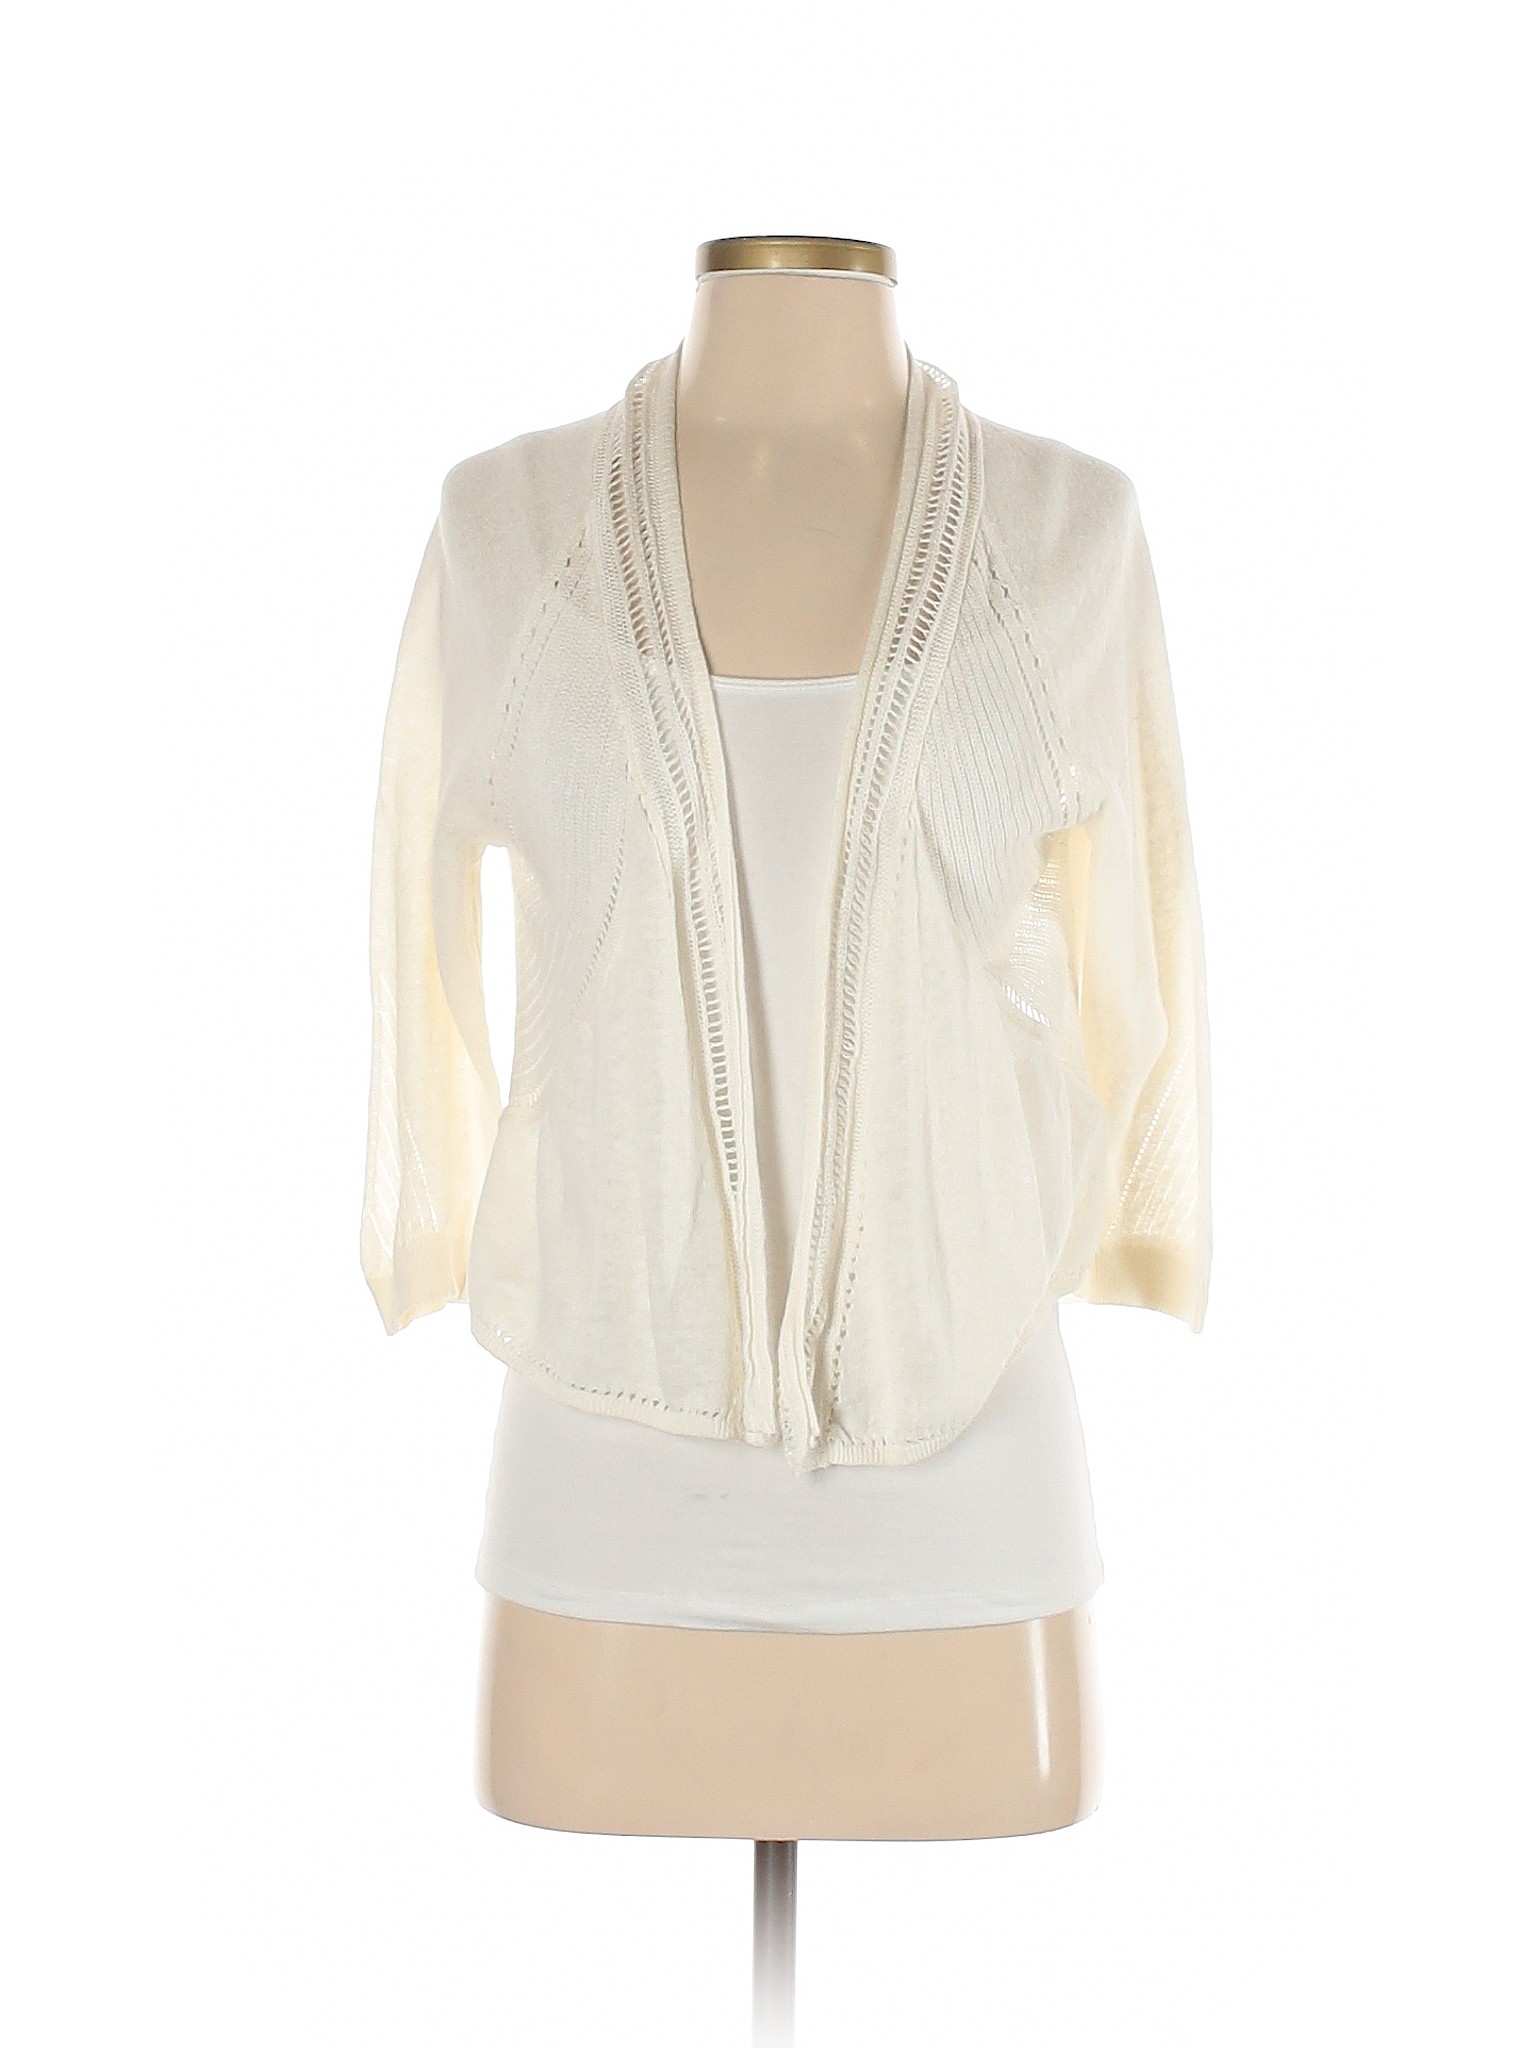 Knitted & Knotted Women Ivory Cardigan S | eBay